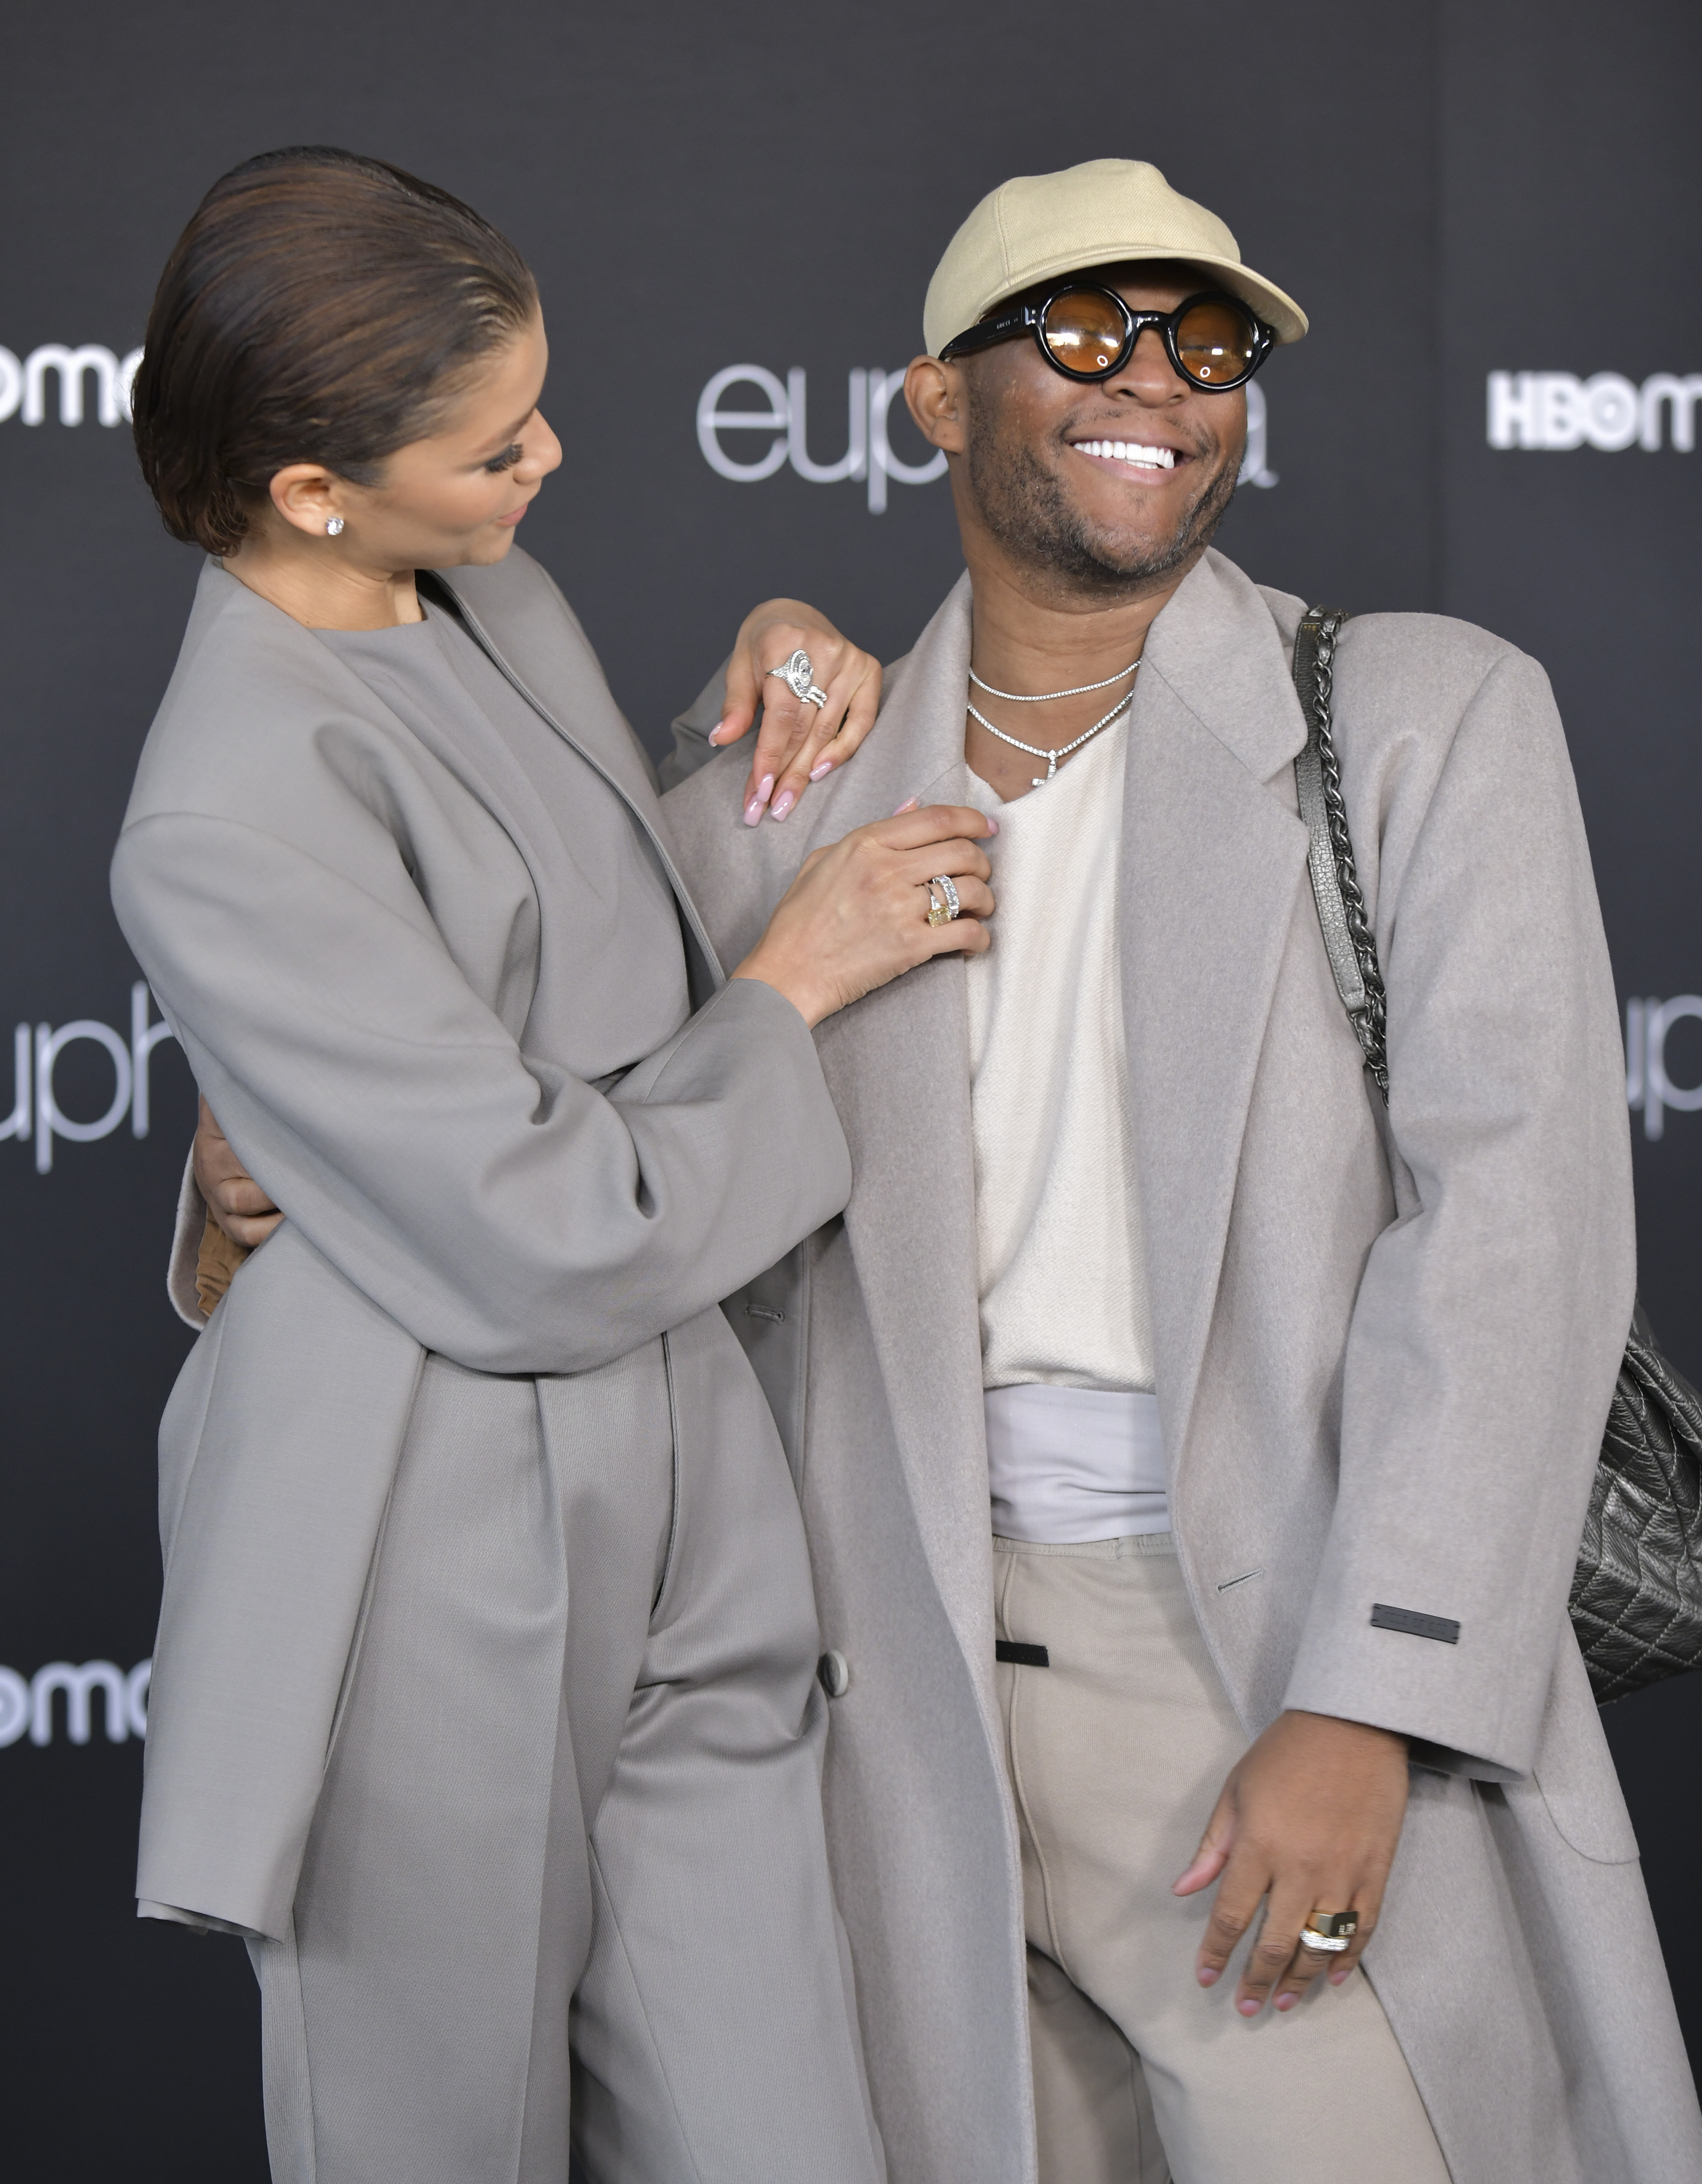 Close-up of Law and Zendaya at a media event